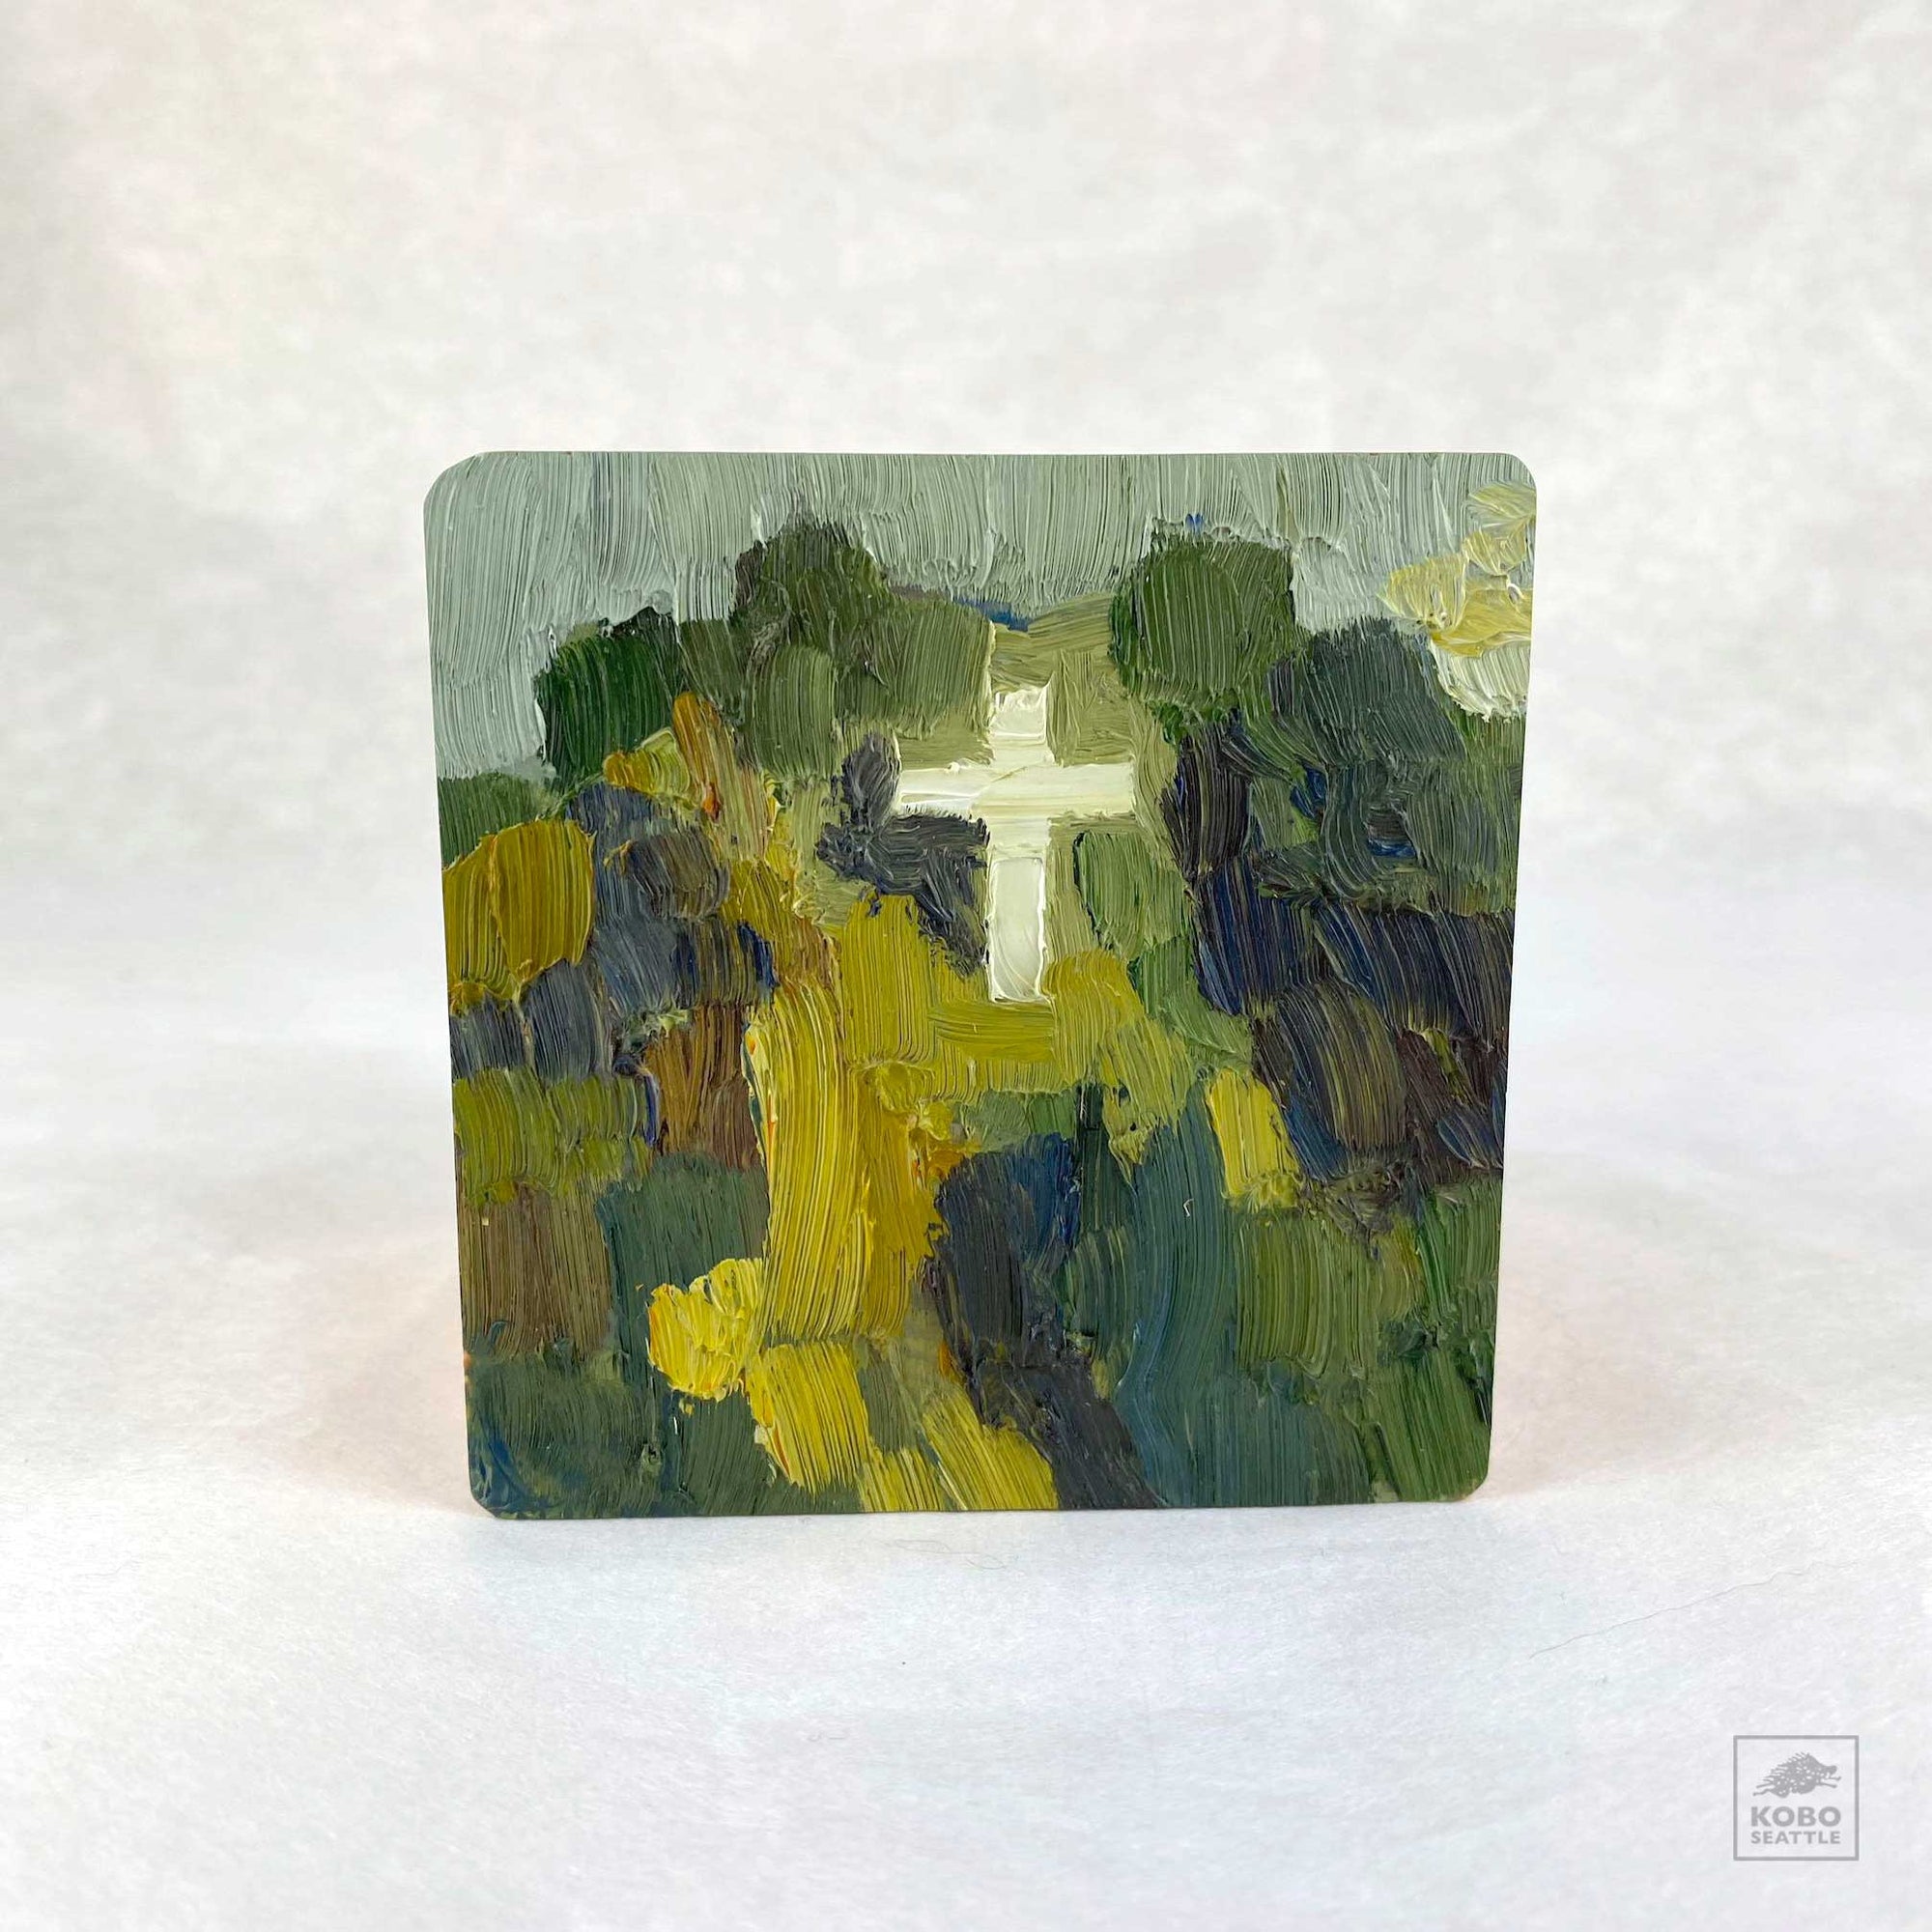 4x4 Landscape No.303 - Oil on wood by Rob Vetter